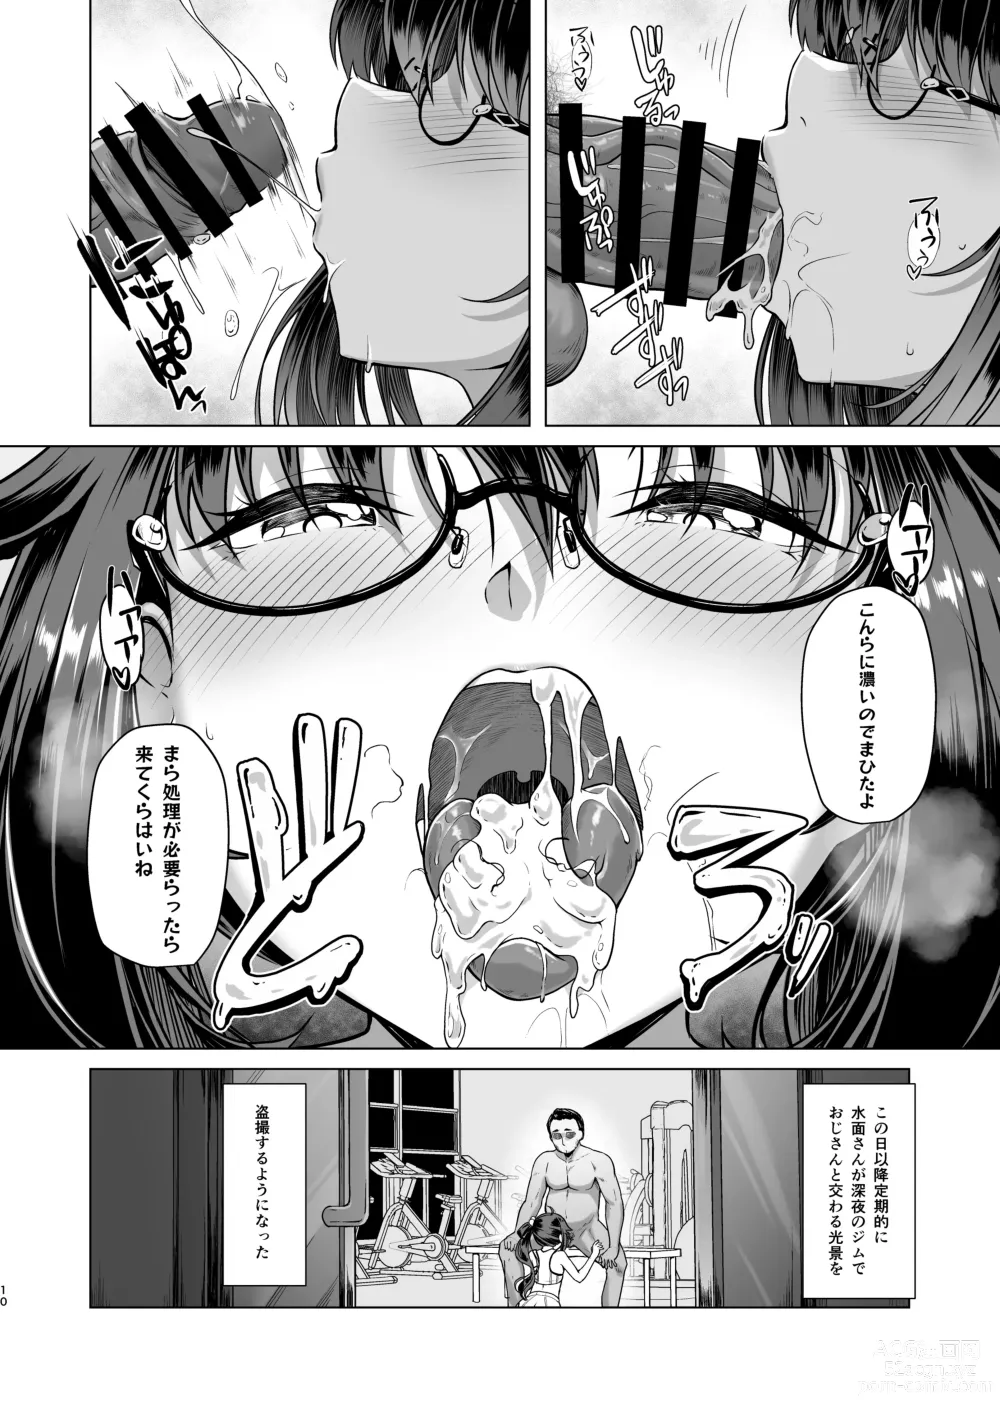 Page 9 of doujinshi 僕だけが知っている深夜の水面